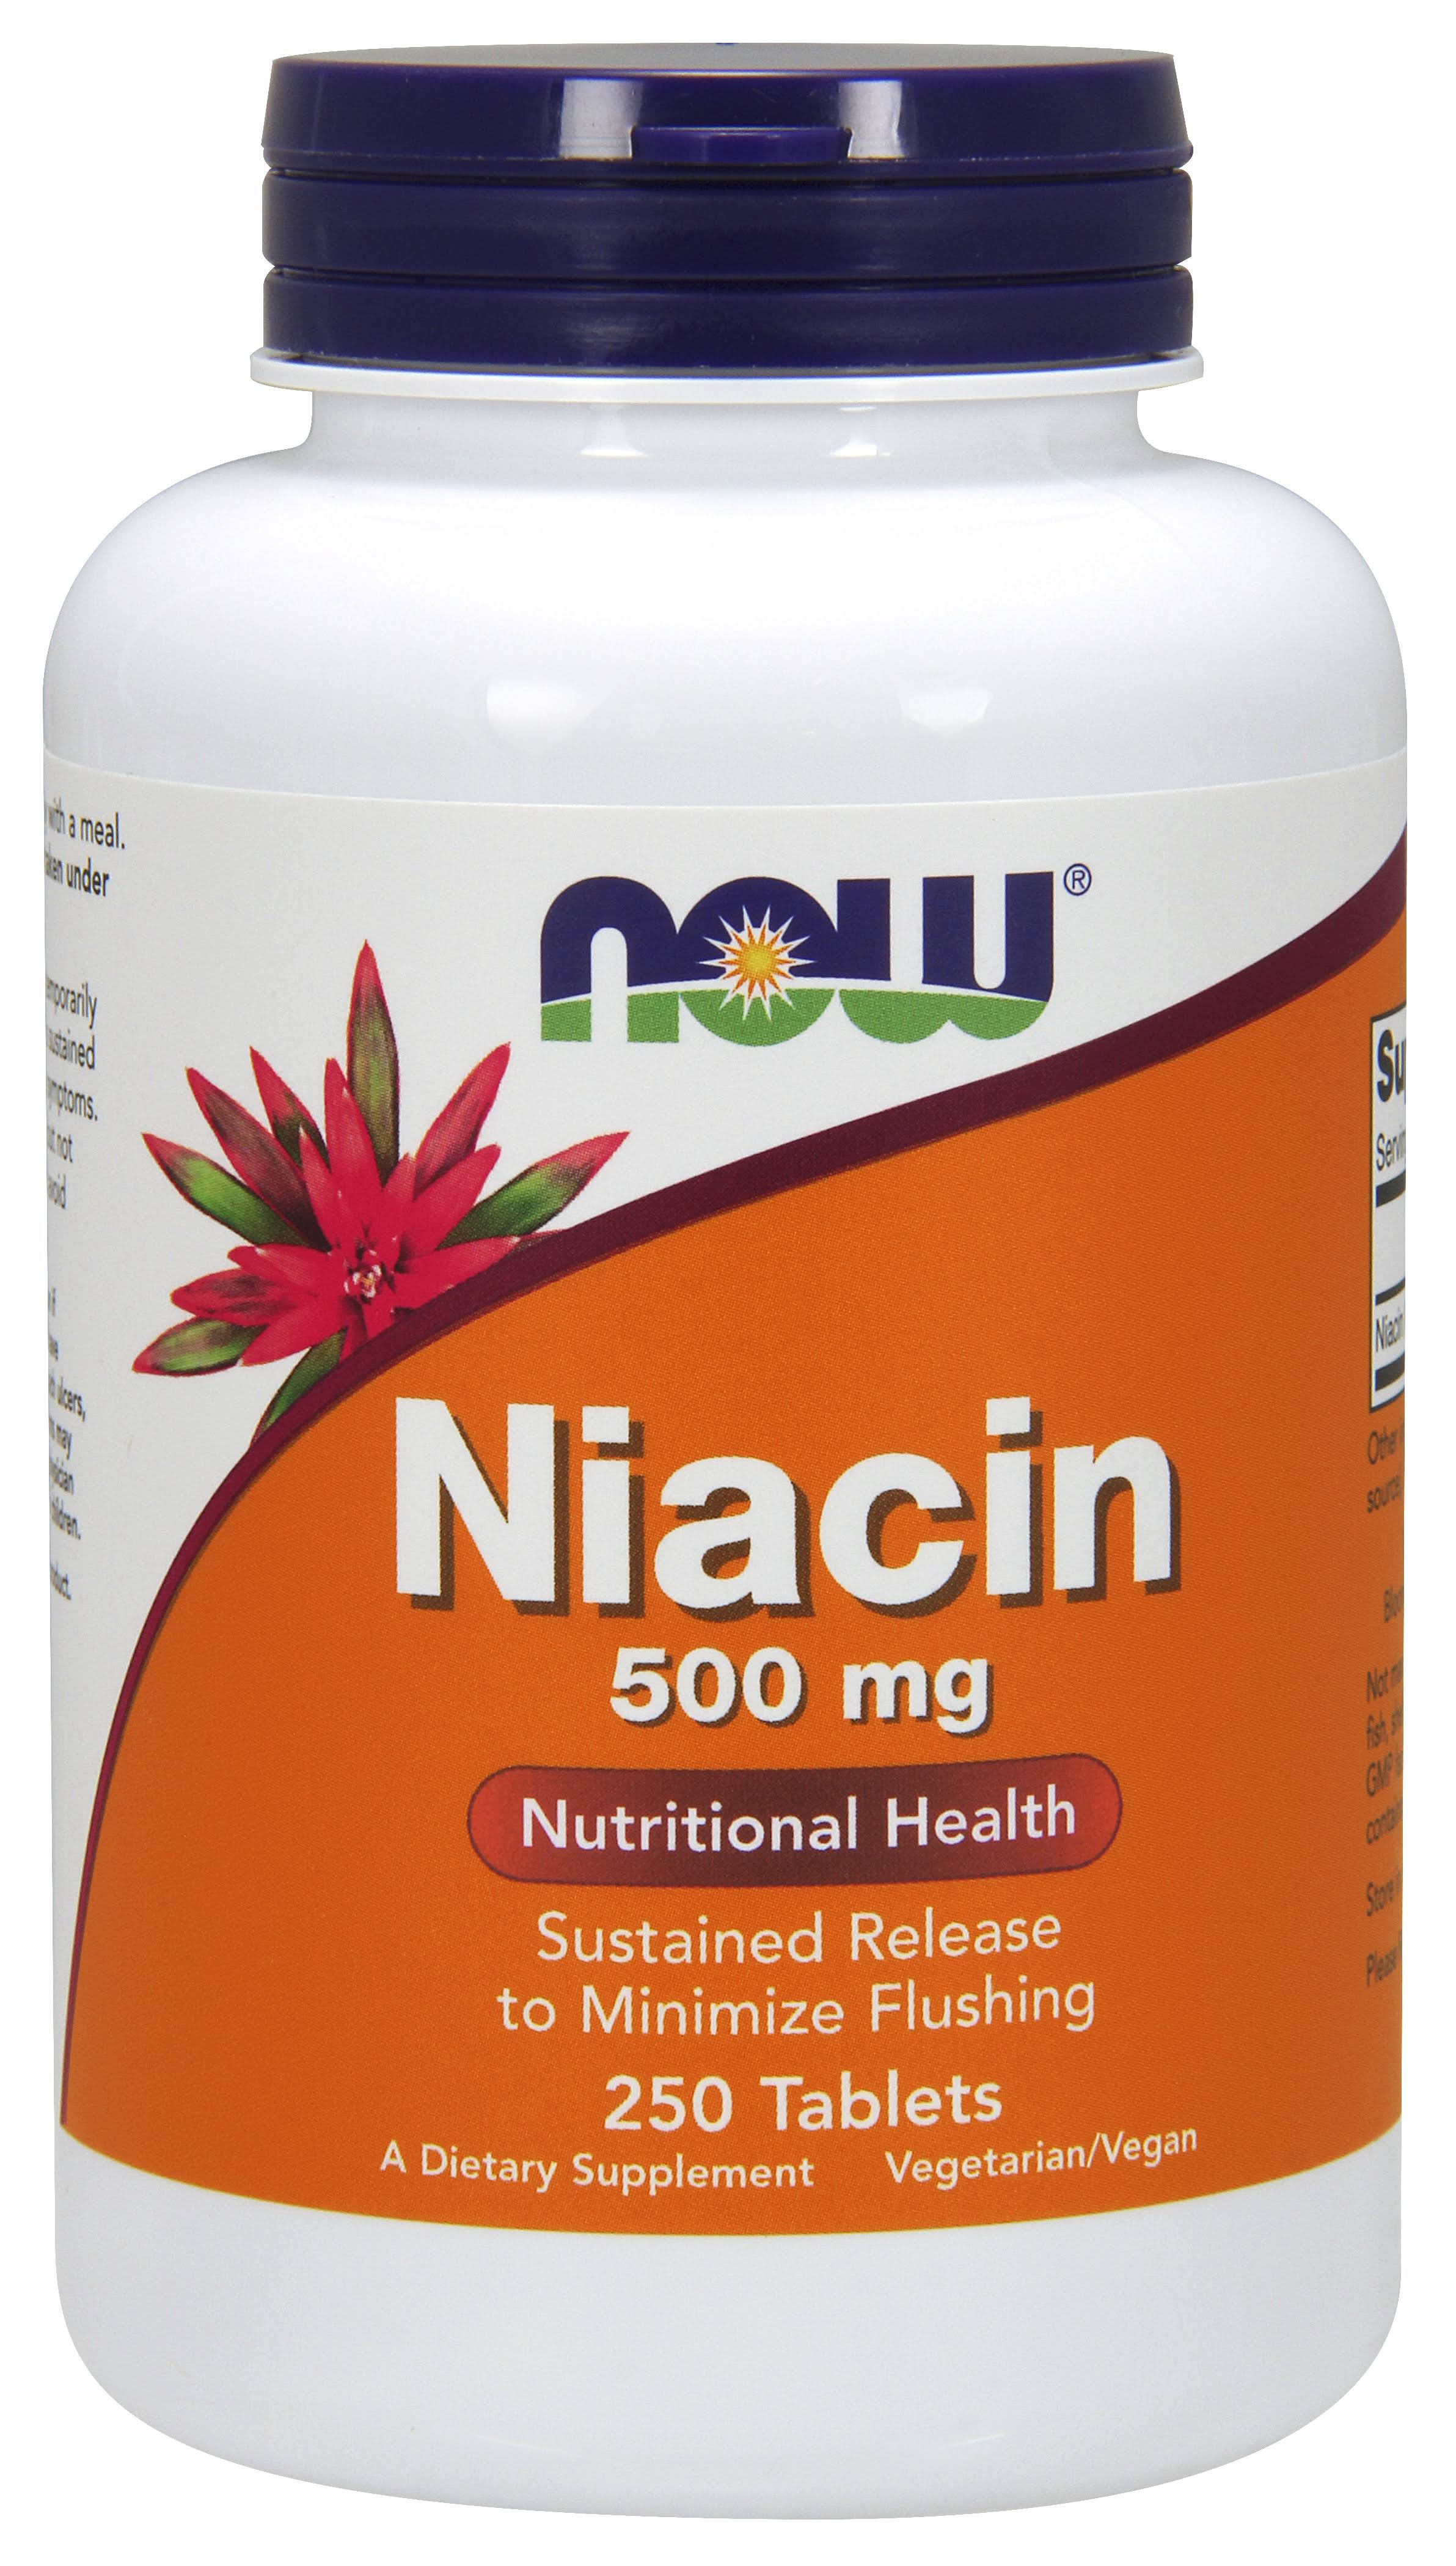 Now Niacin 500mg Dietary Supplement - 250 Tablets